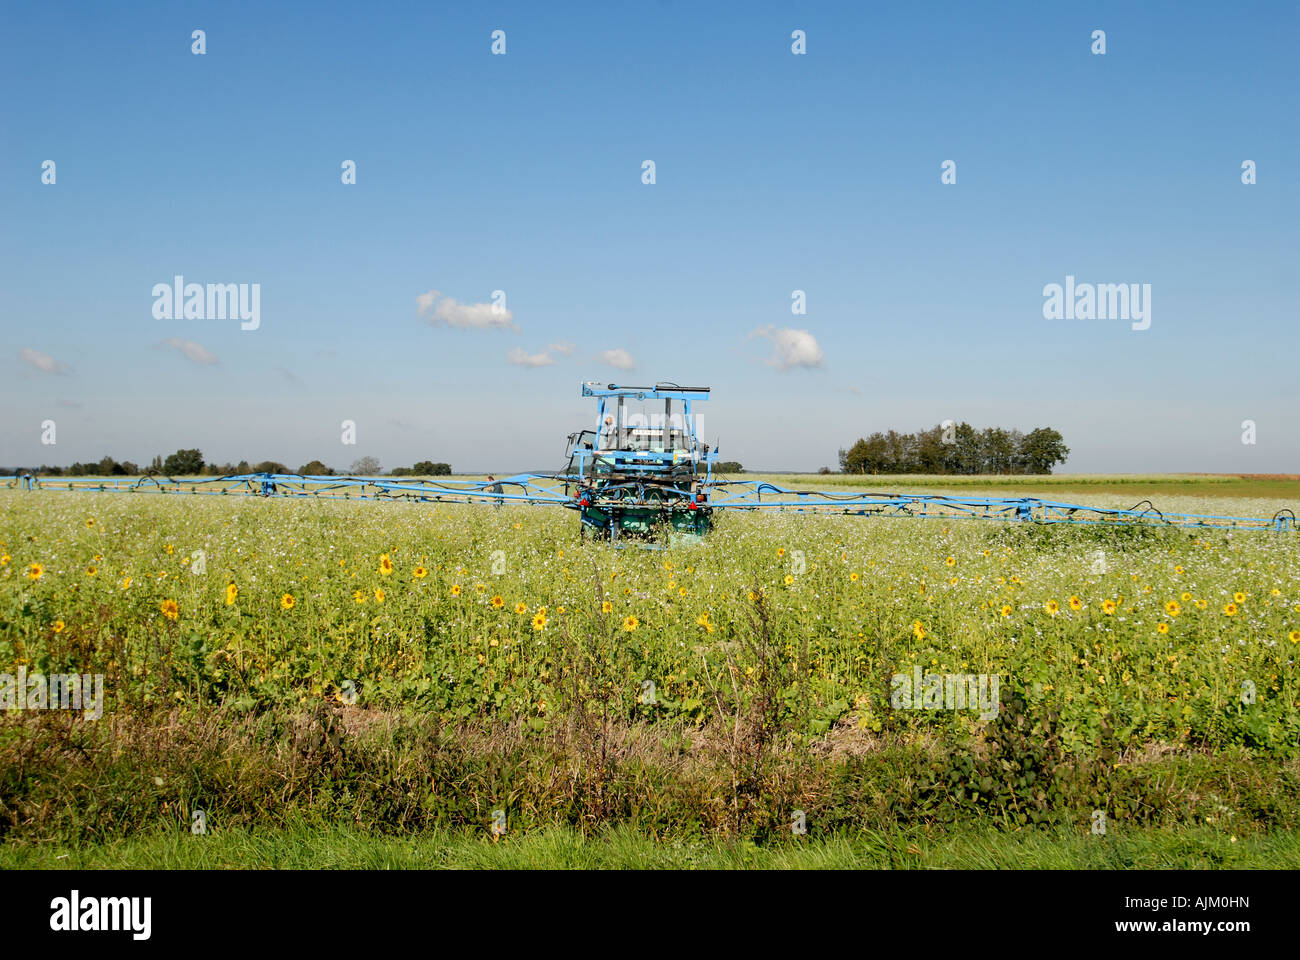 Tractor with crop sprayer boom extended, Vienne, France. Stock Photo